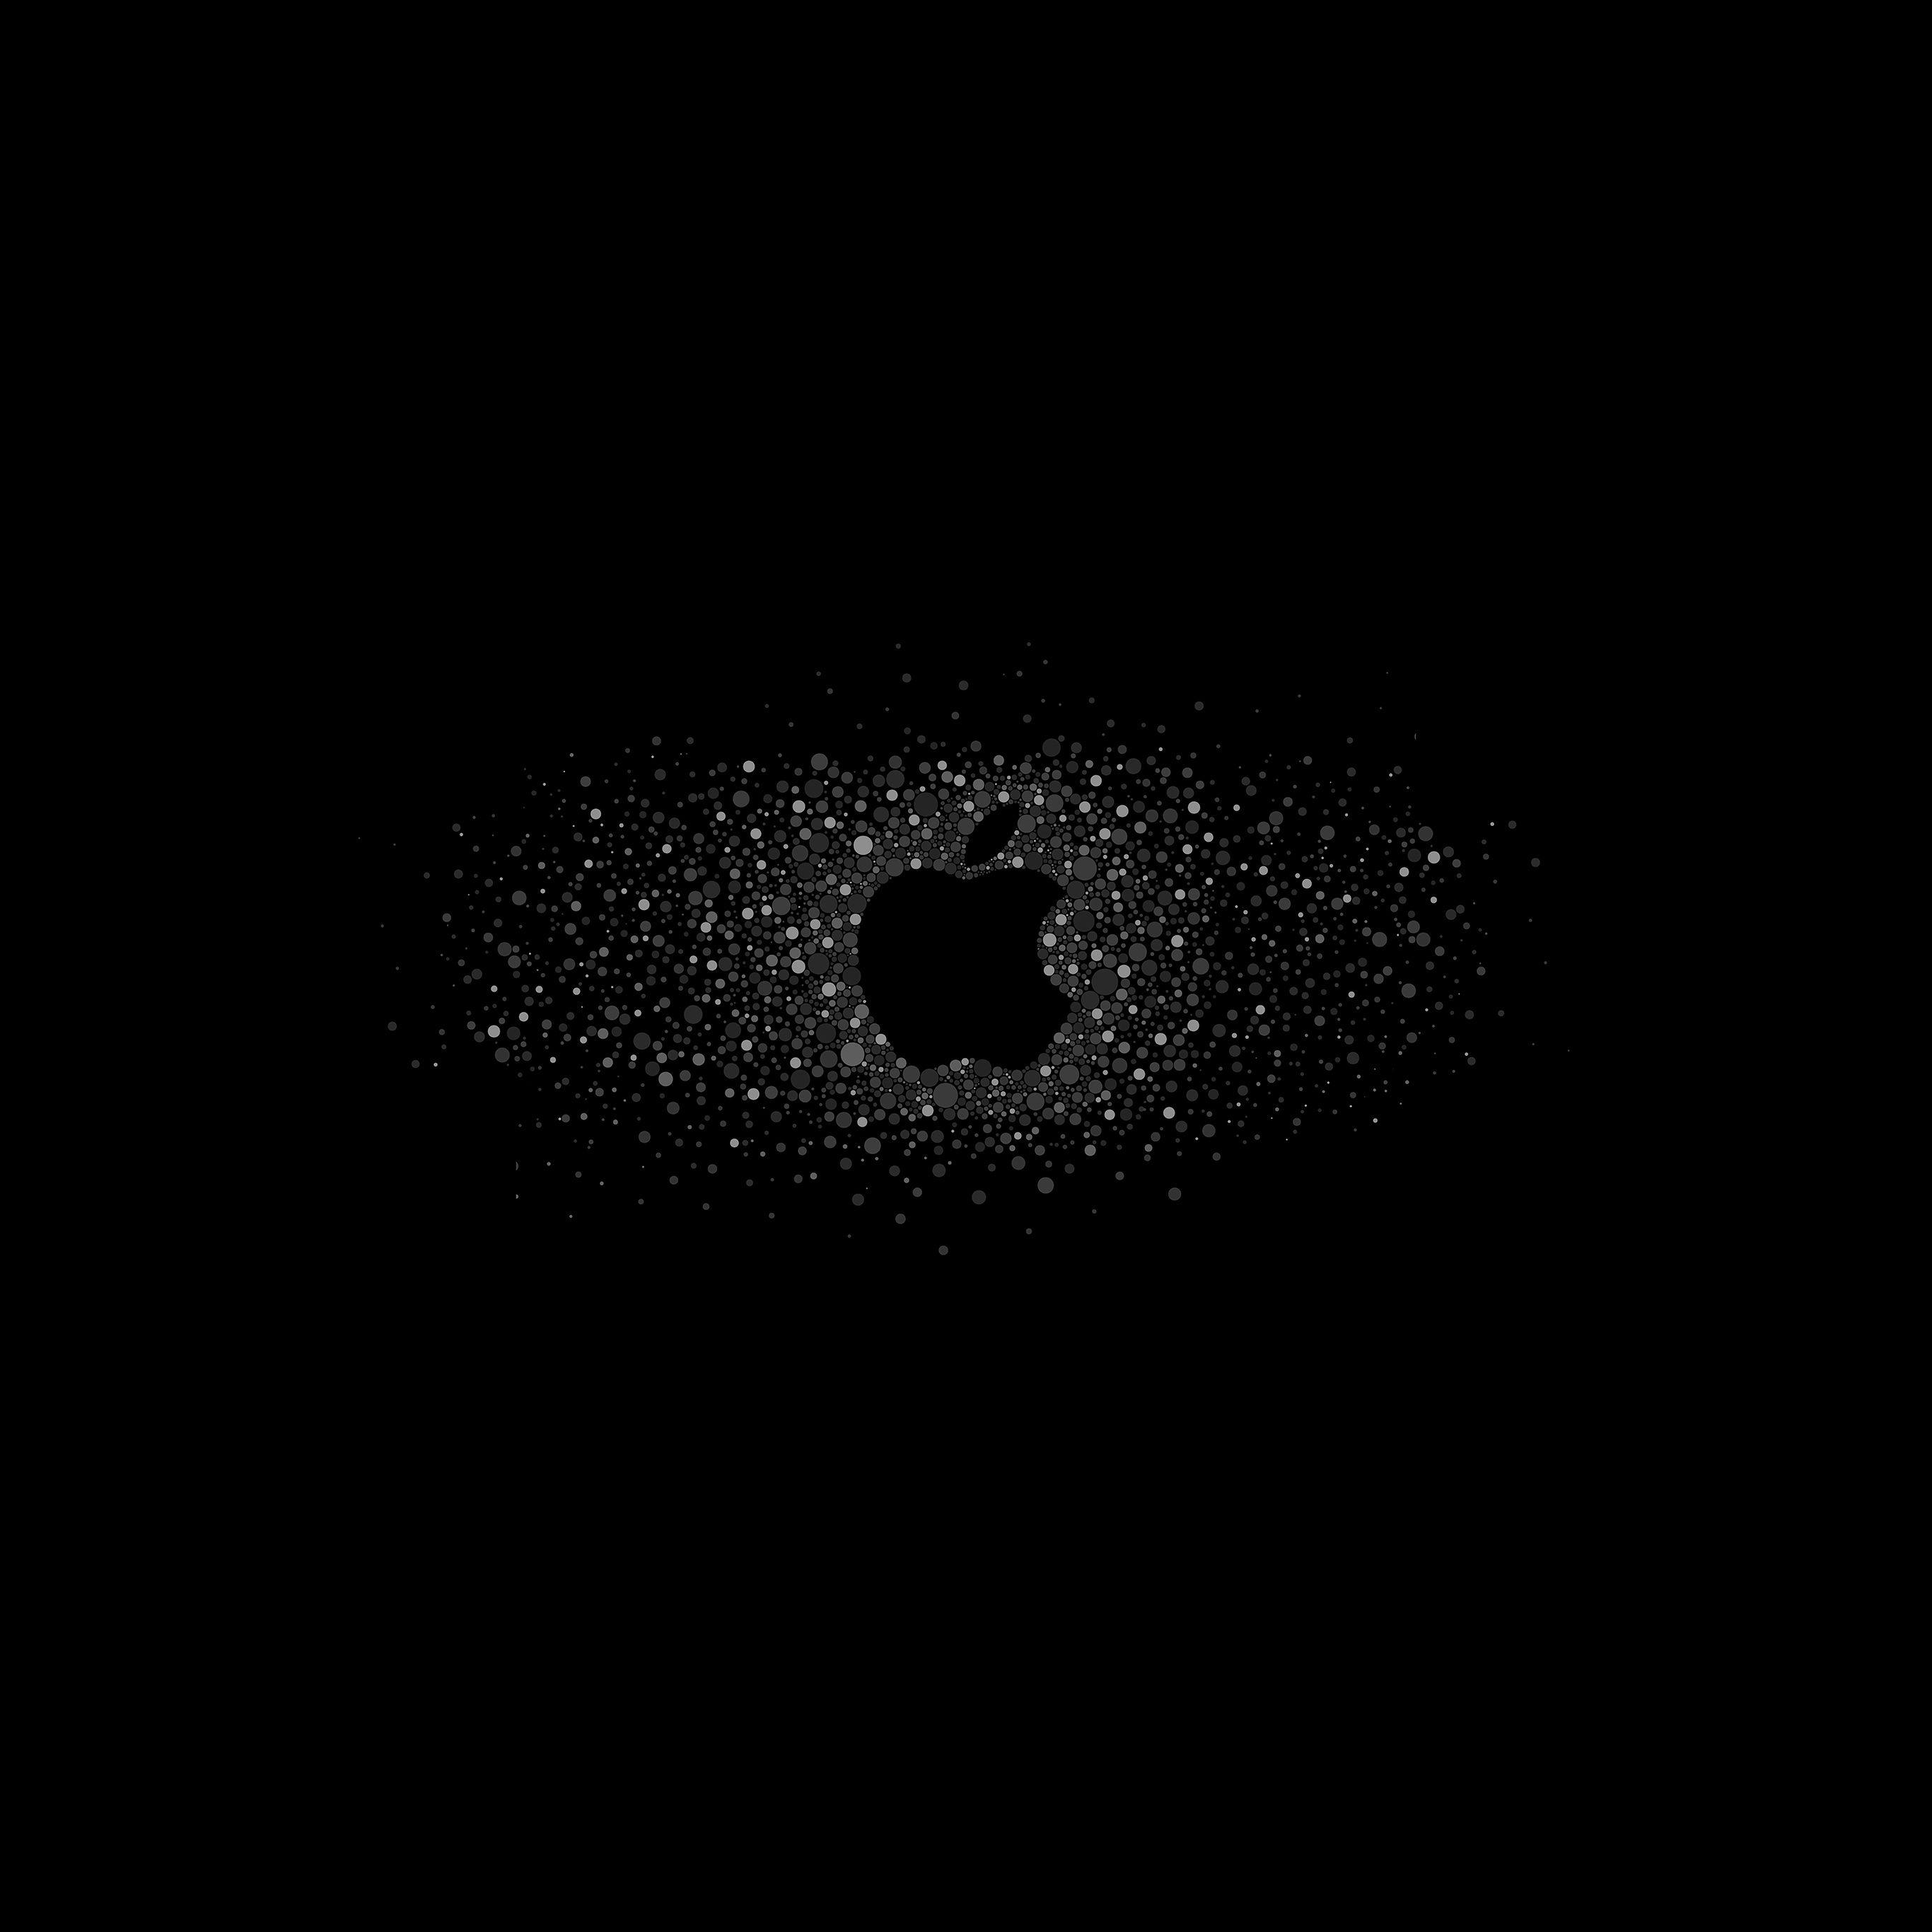 New 2016 Small Apple Logo - Wallpapers of the week: Apple logo